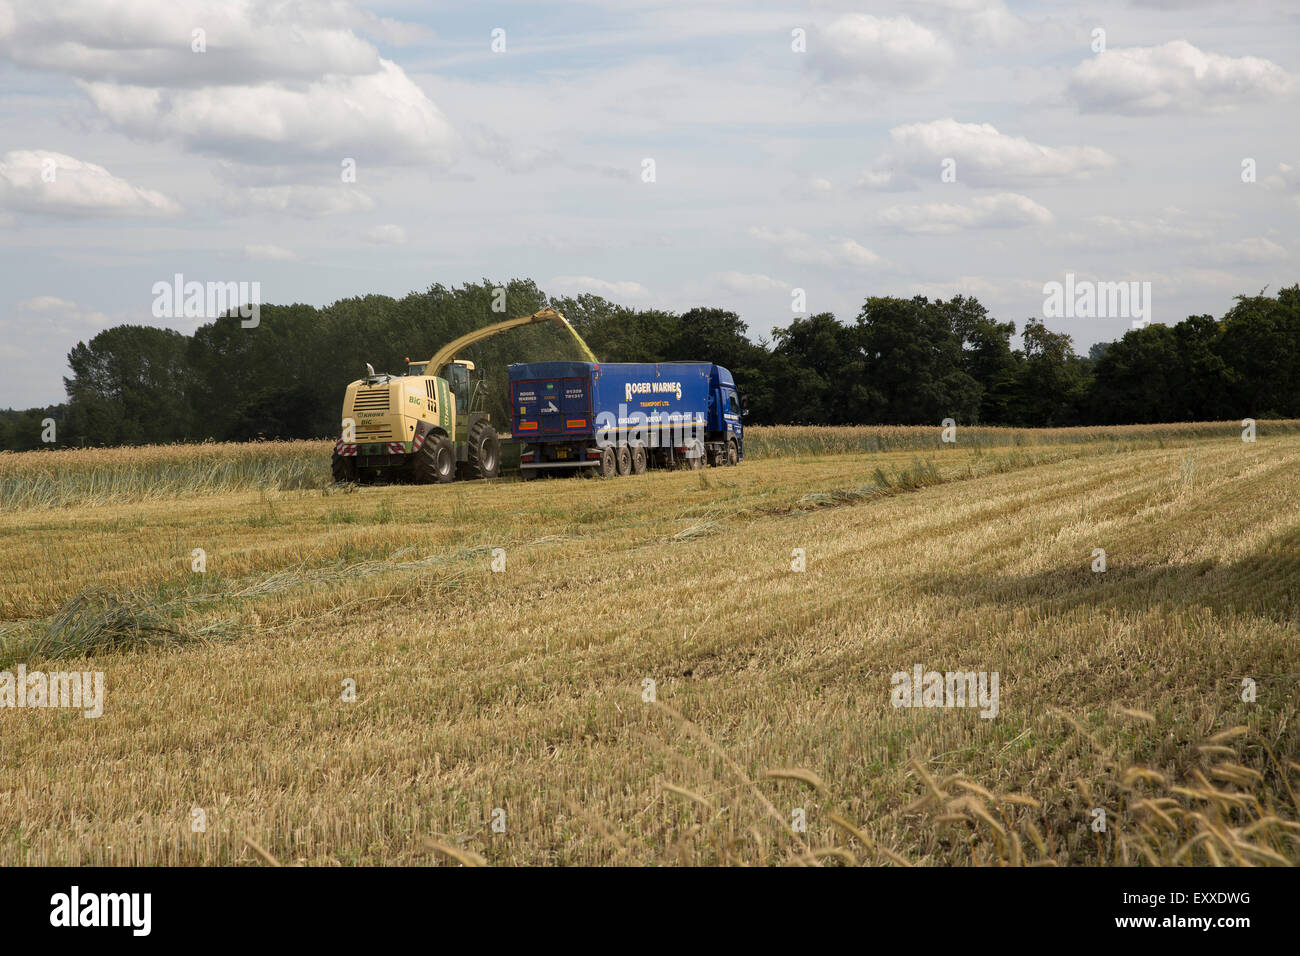 Watton, UK,17th July 2015, Combine Harvester harvesting the fields and loading on to a lorry in Watton Norfolk after thunderstorms last nigh Credit: Keith Larby/Alamy Live News Stock Photo